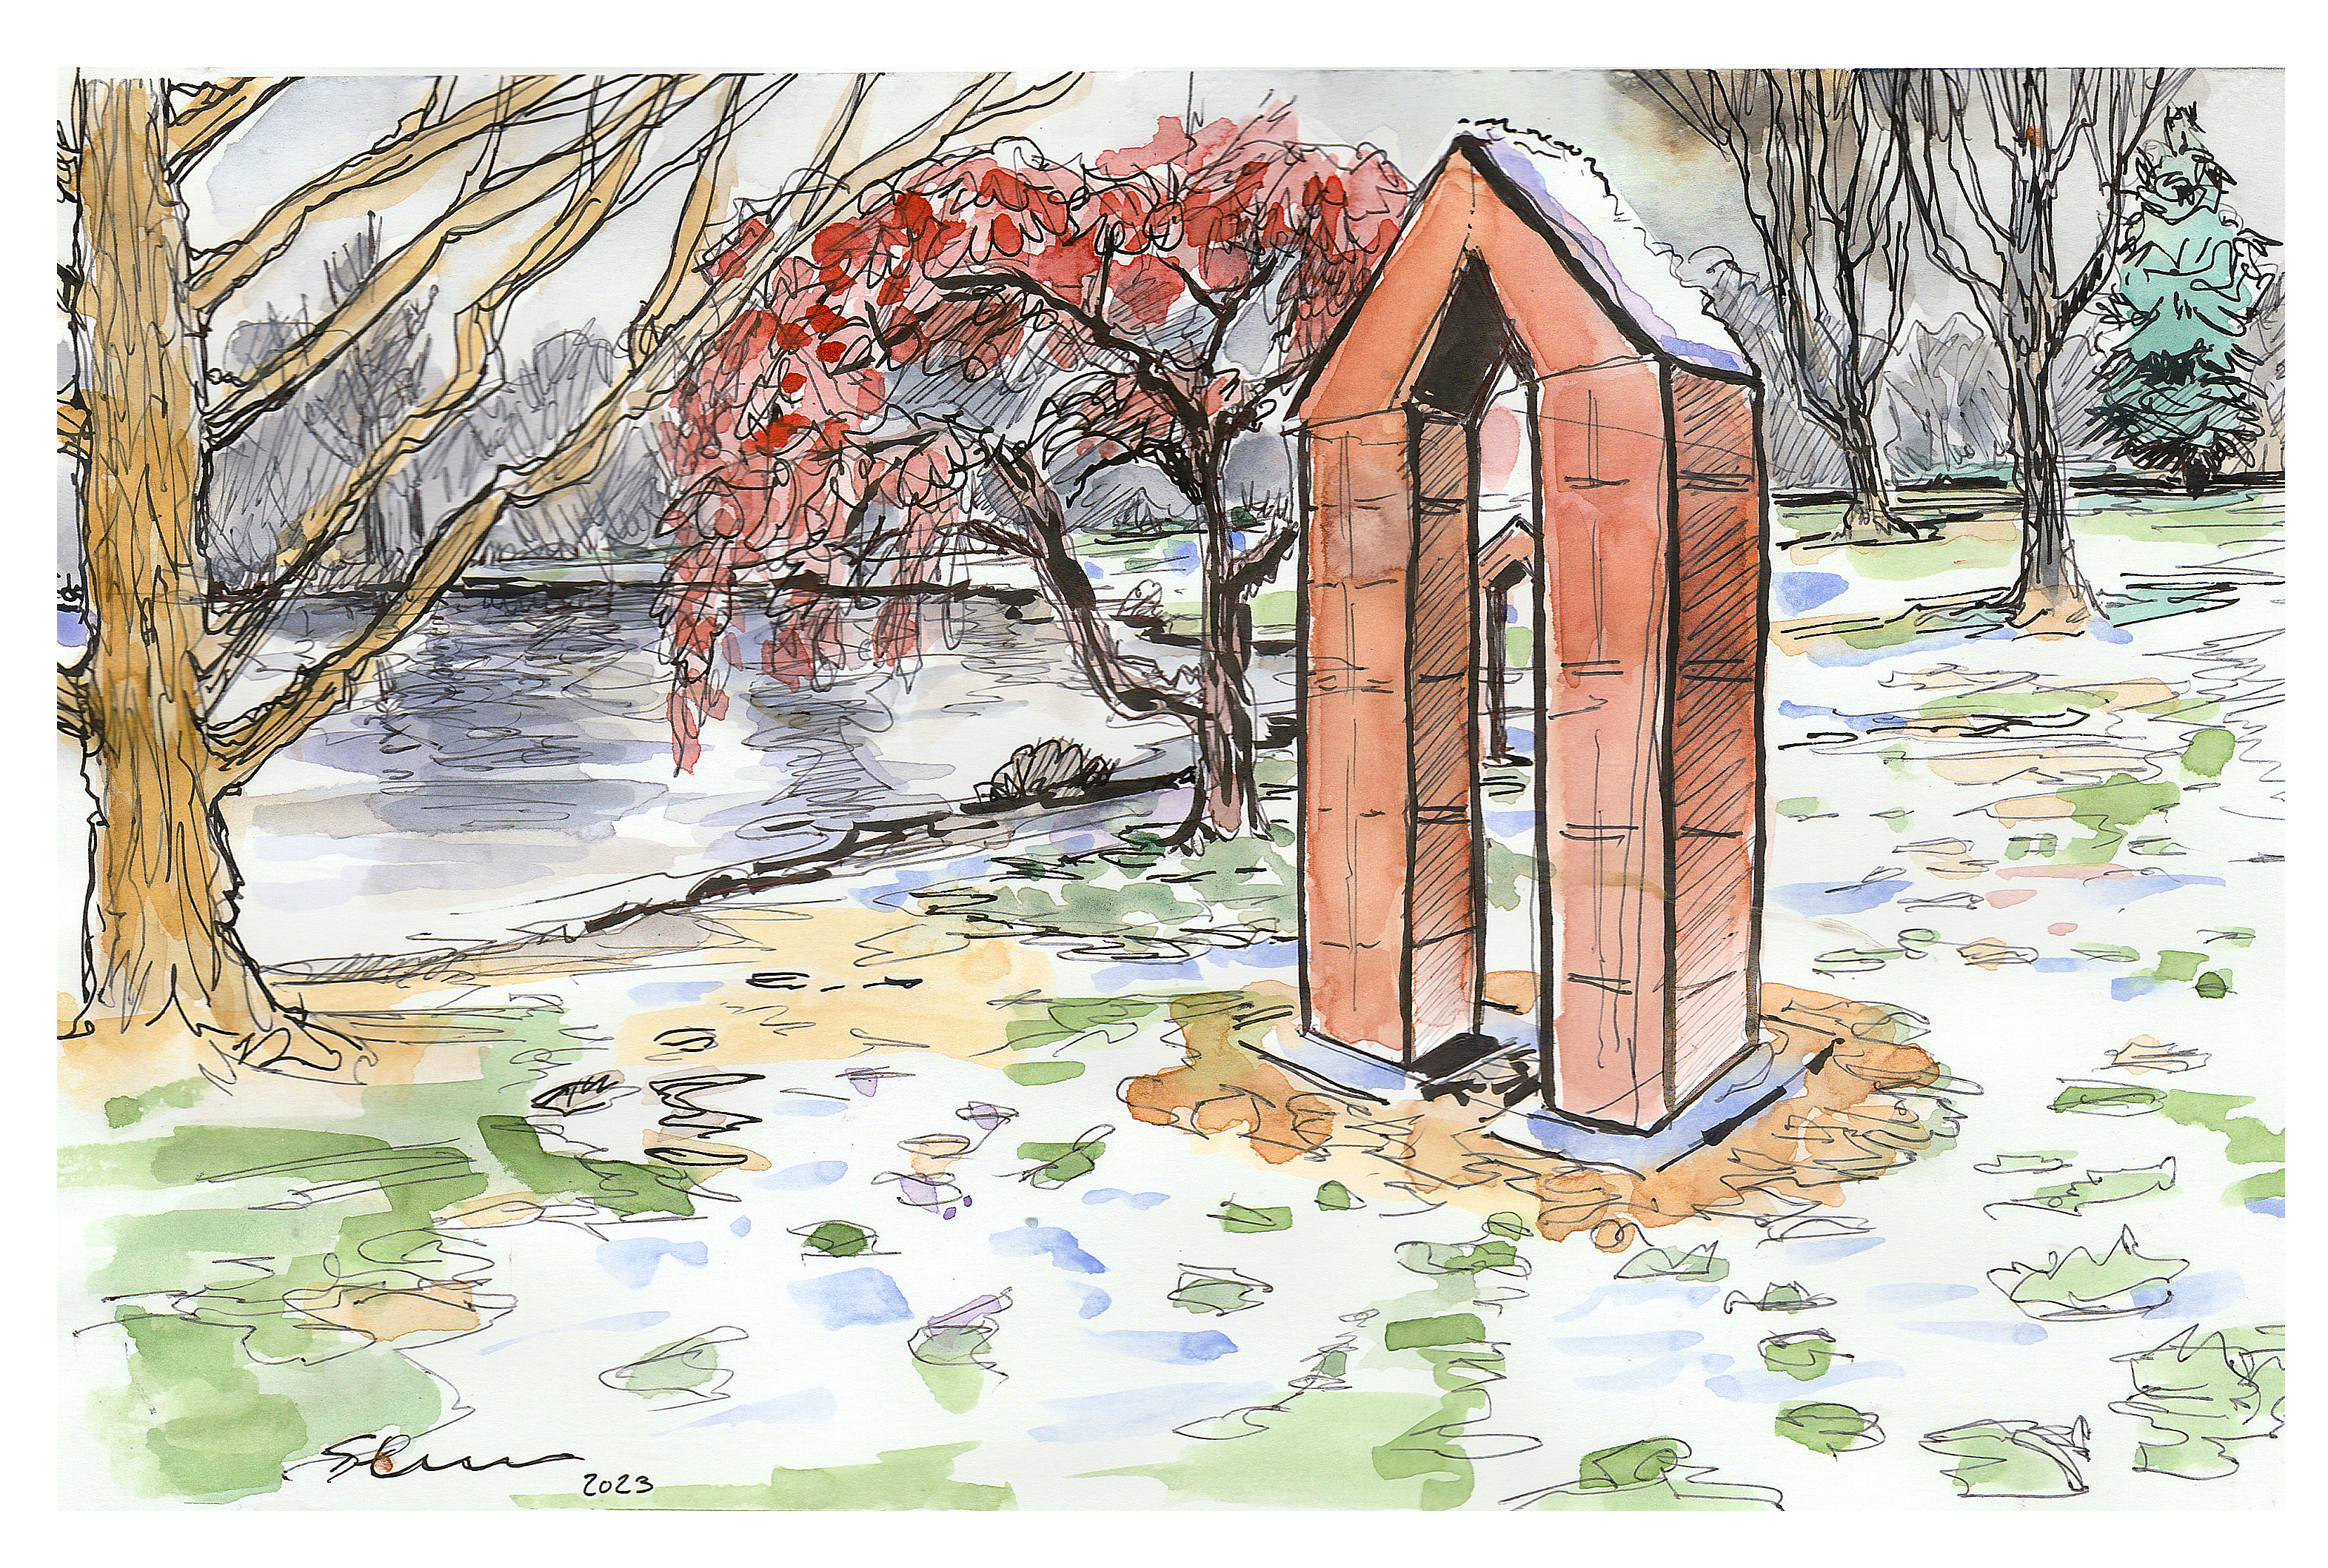 Ink and watercolor sketch of 'Thresholds' at the Duck Pond with a light dusting of snow that happened on March 12